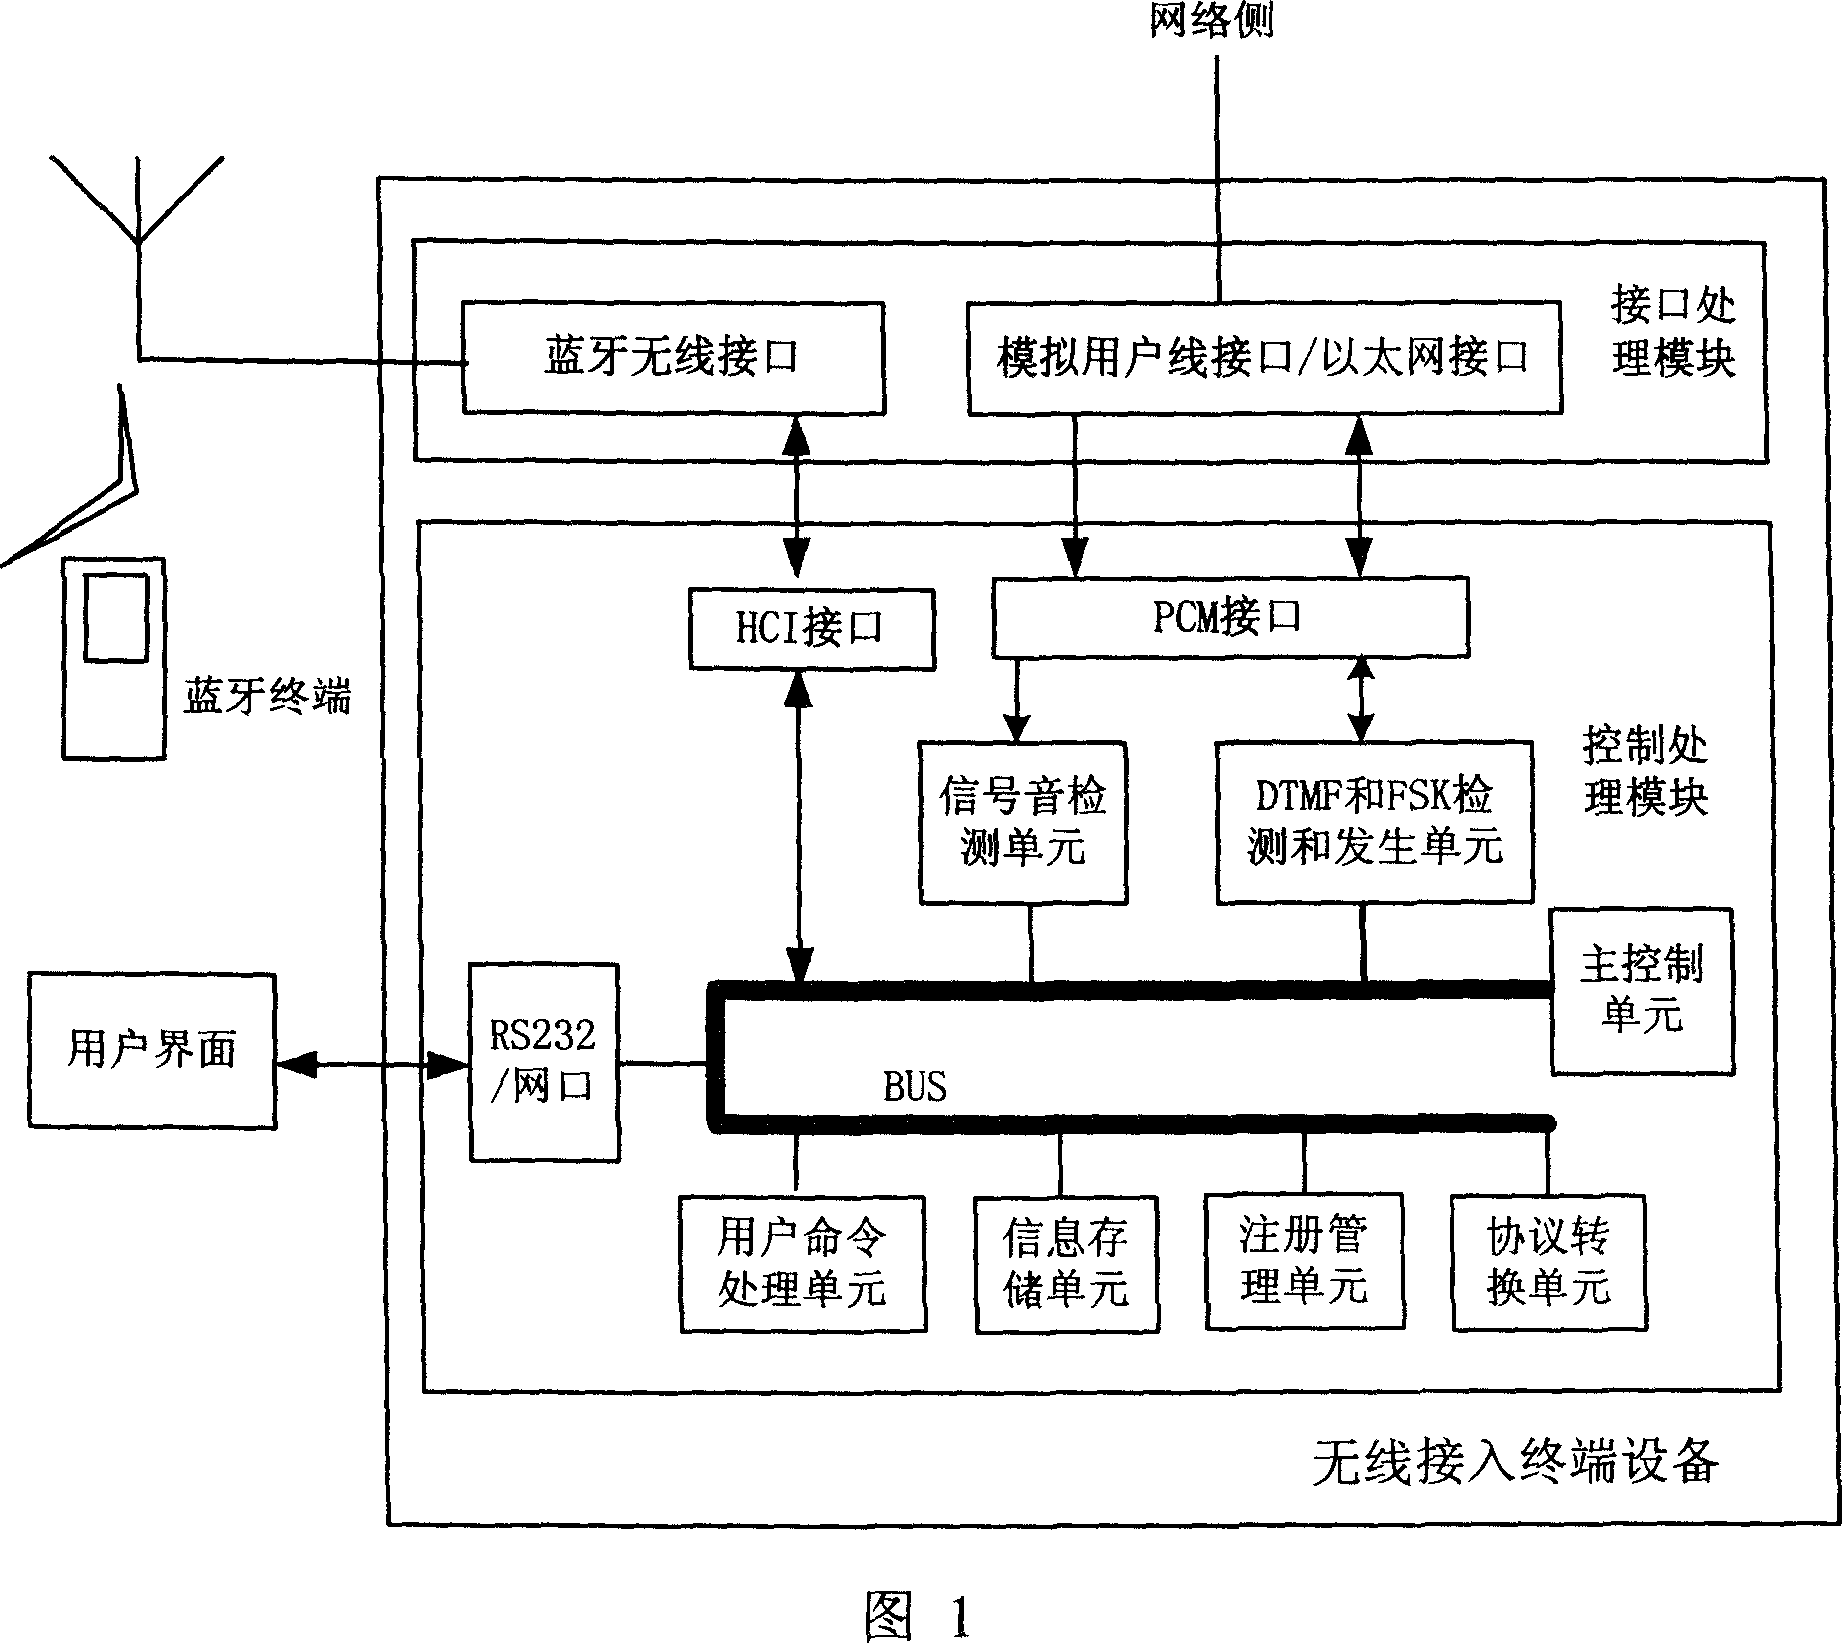 Wireless terminal access method based on the bluetooth interface and its device